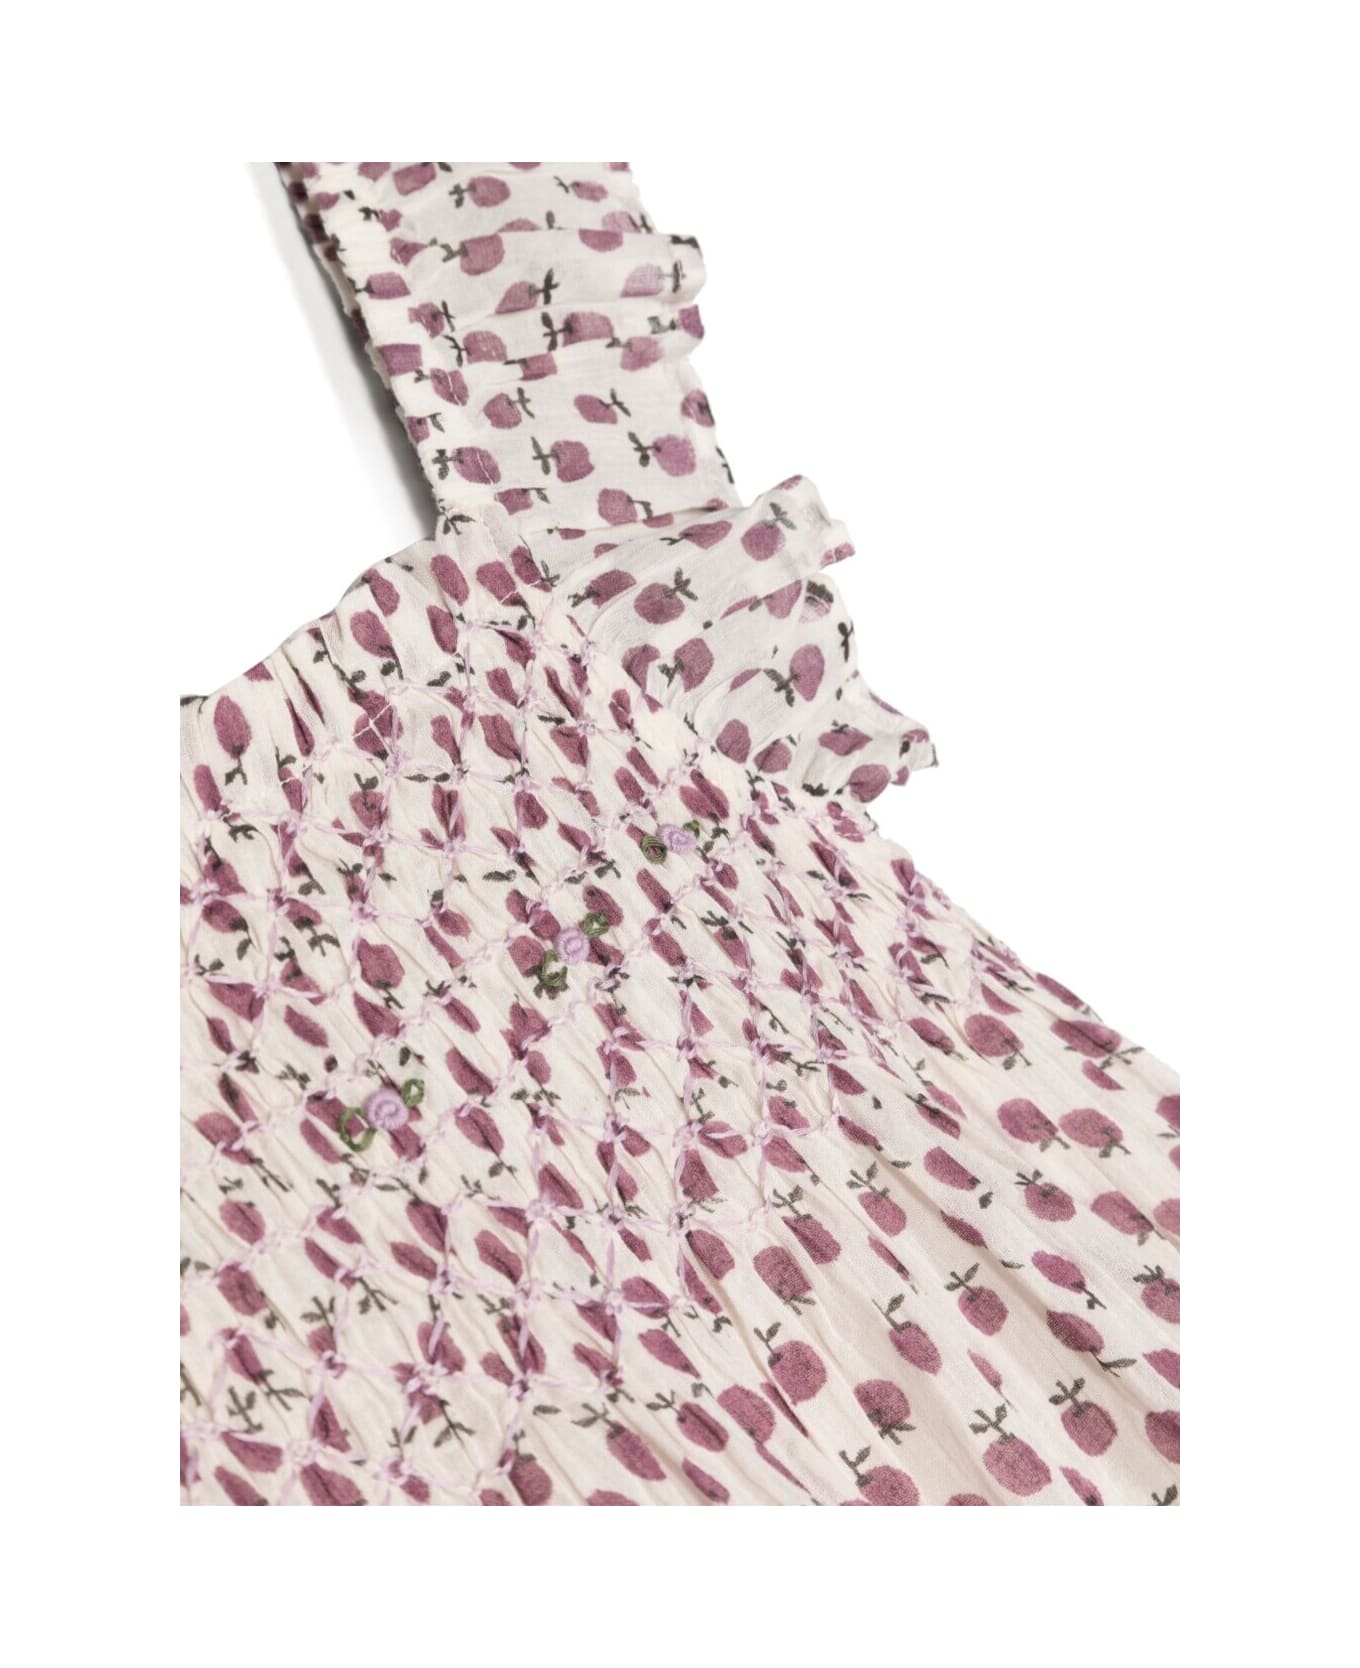 Emile Et Ida All-over Apple Print Dress In White And Red Cotton Girl - Violet